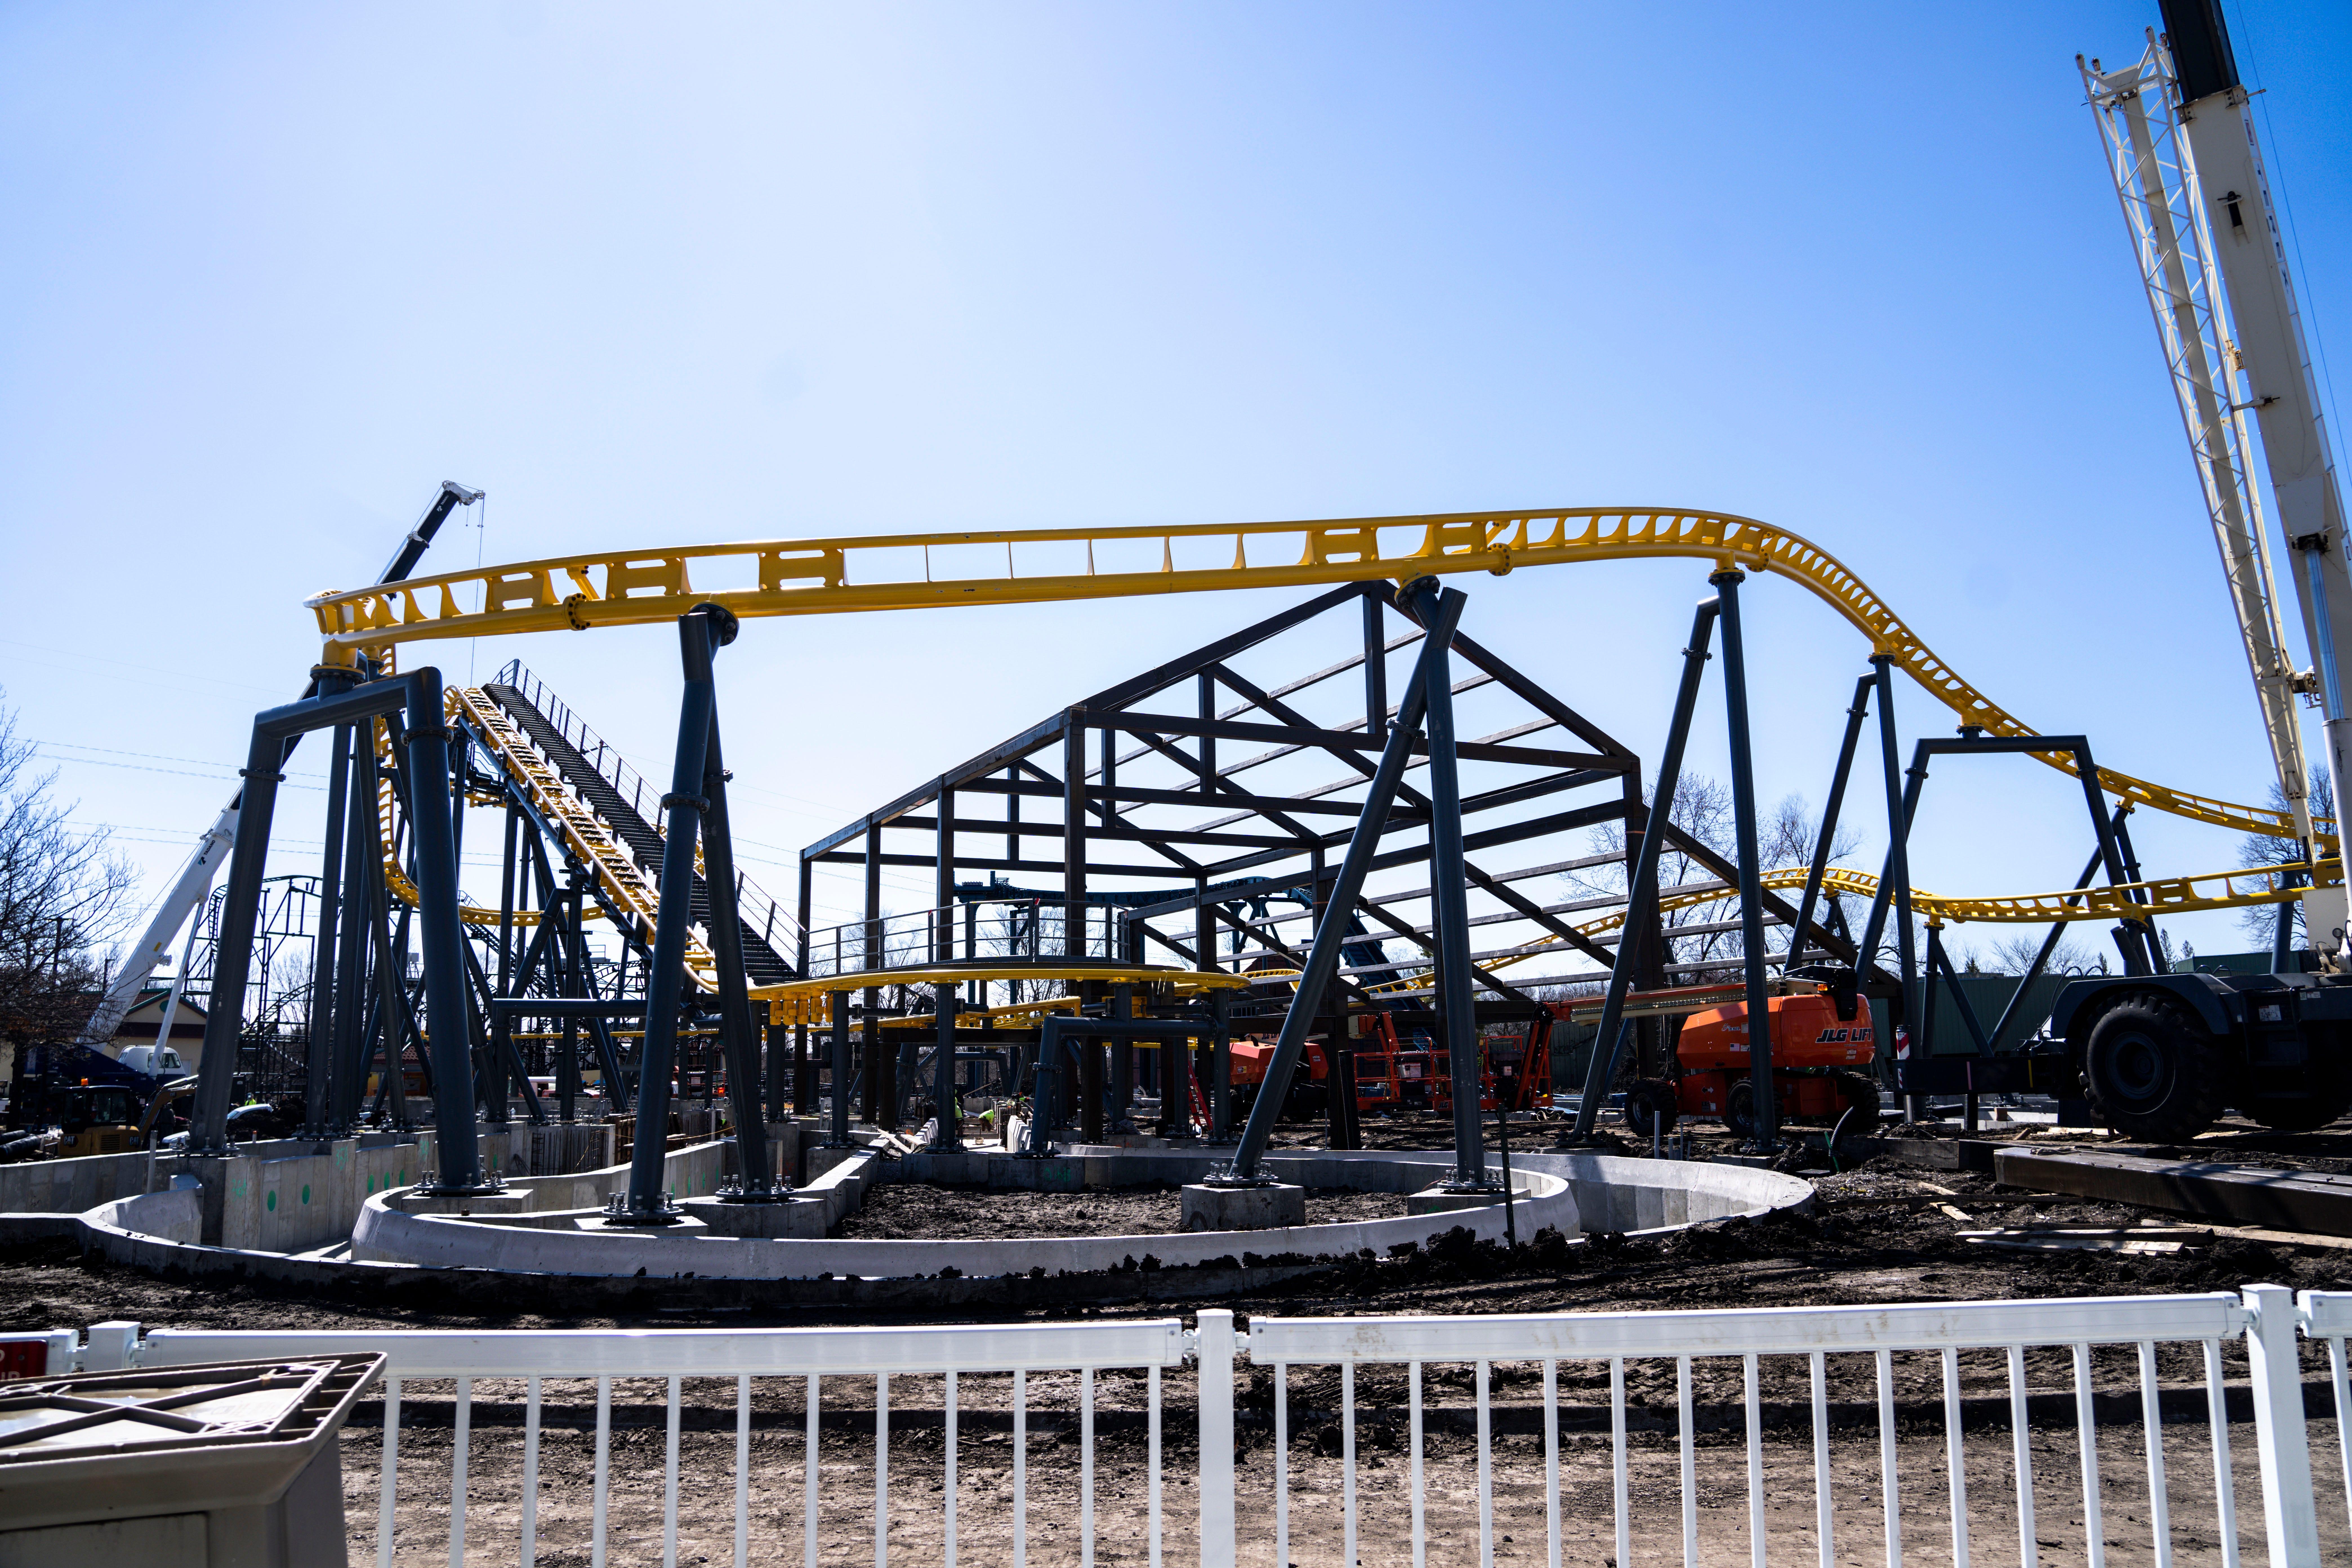 Construction continues on the Flying Viking roller coaster and Draken Falls log ride during a media tour at Adventureland Park in Altoona.